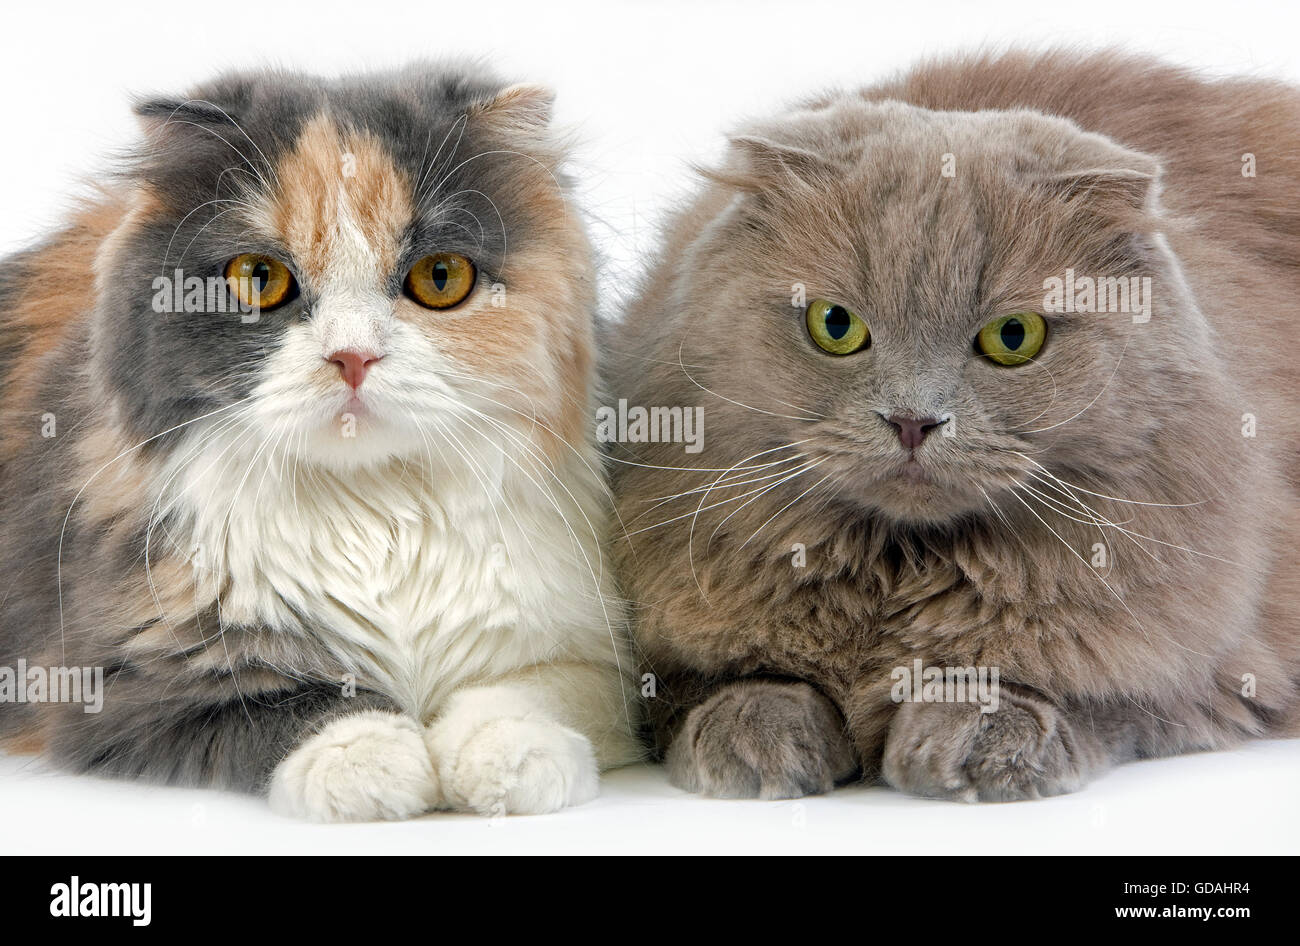 Blue Cream and White Highland Fold Lilac Self Highland Fold or Lilac Self Scottish Fold Longhair Domestic Cat, Females laying against White Background Stock Photo